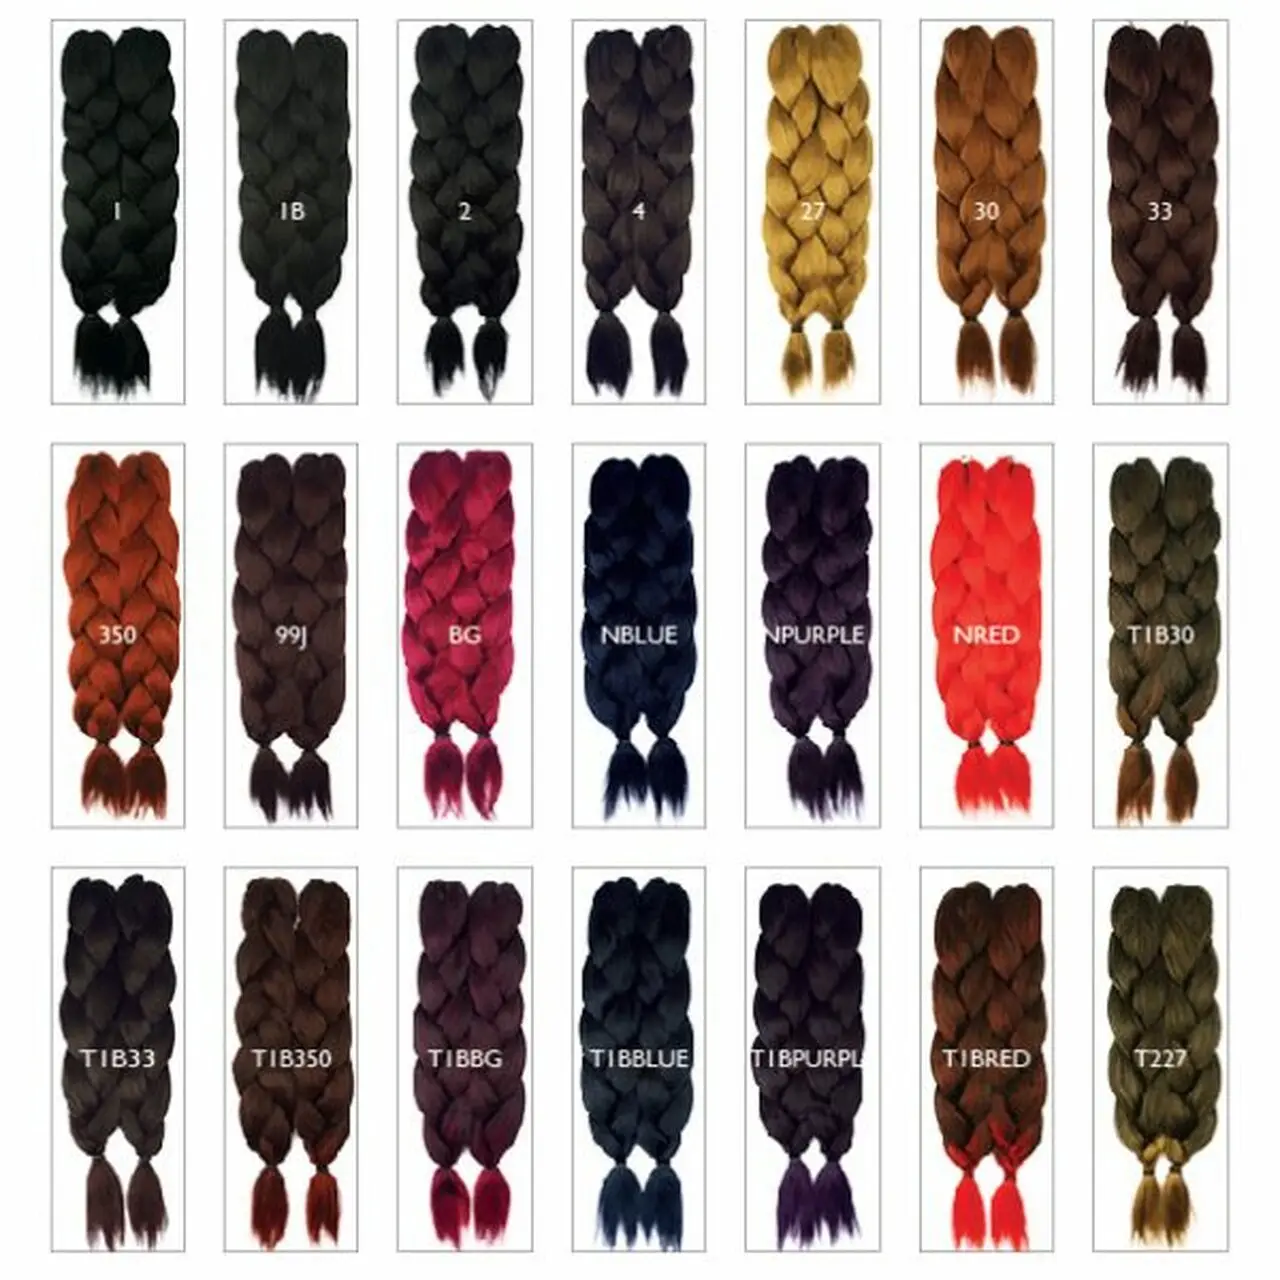 

coloured cheap 3 tone 5 pack x pression jumbo 3x ghana curly darling yaki bairds crochet braid spectra braiding hair, Per color two tone three tone color more than 55 color